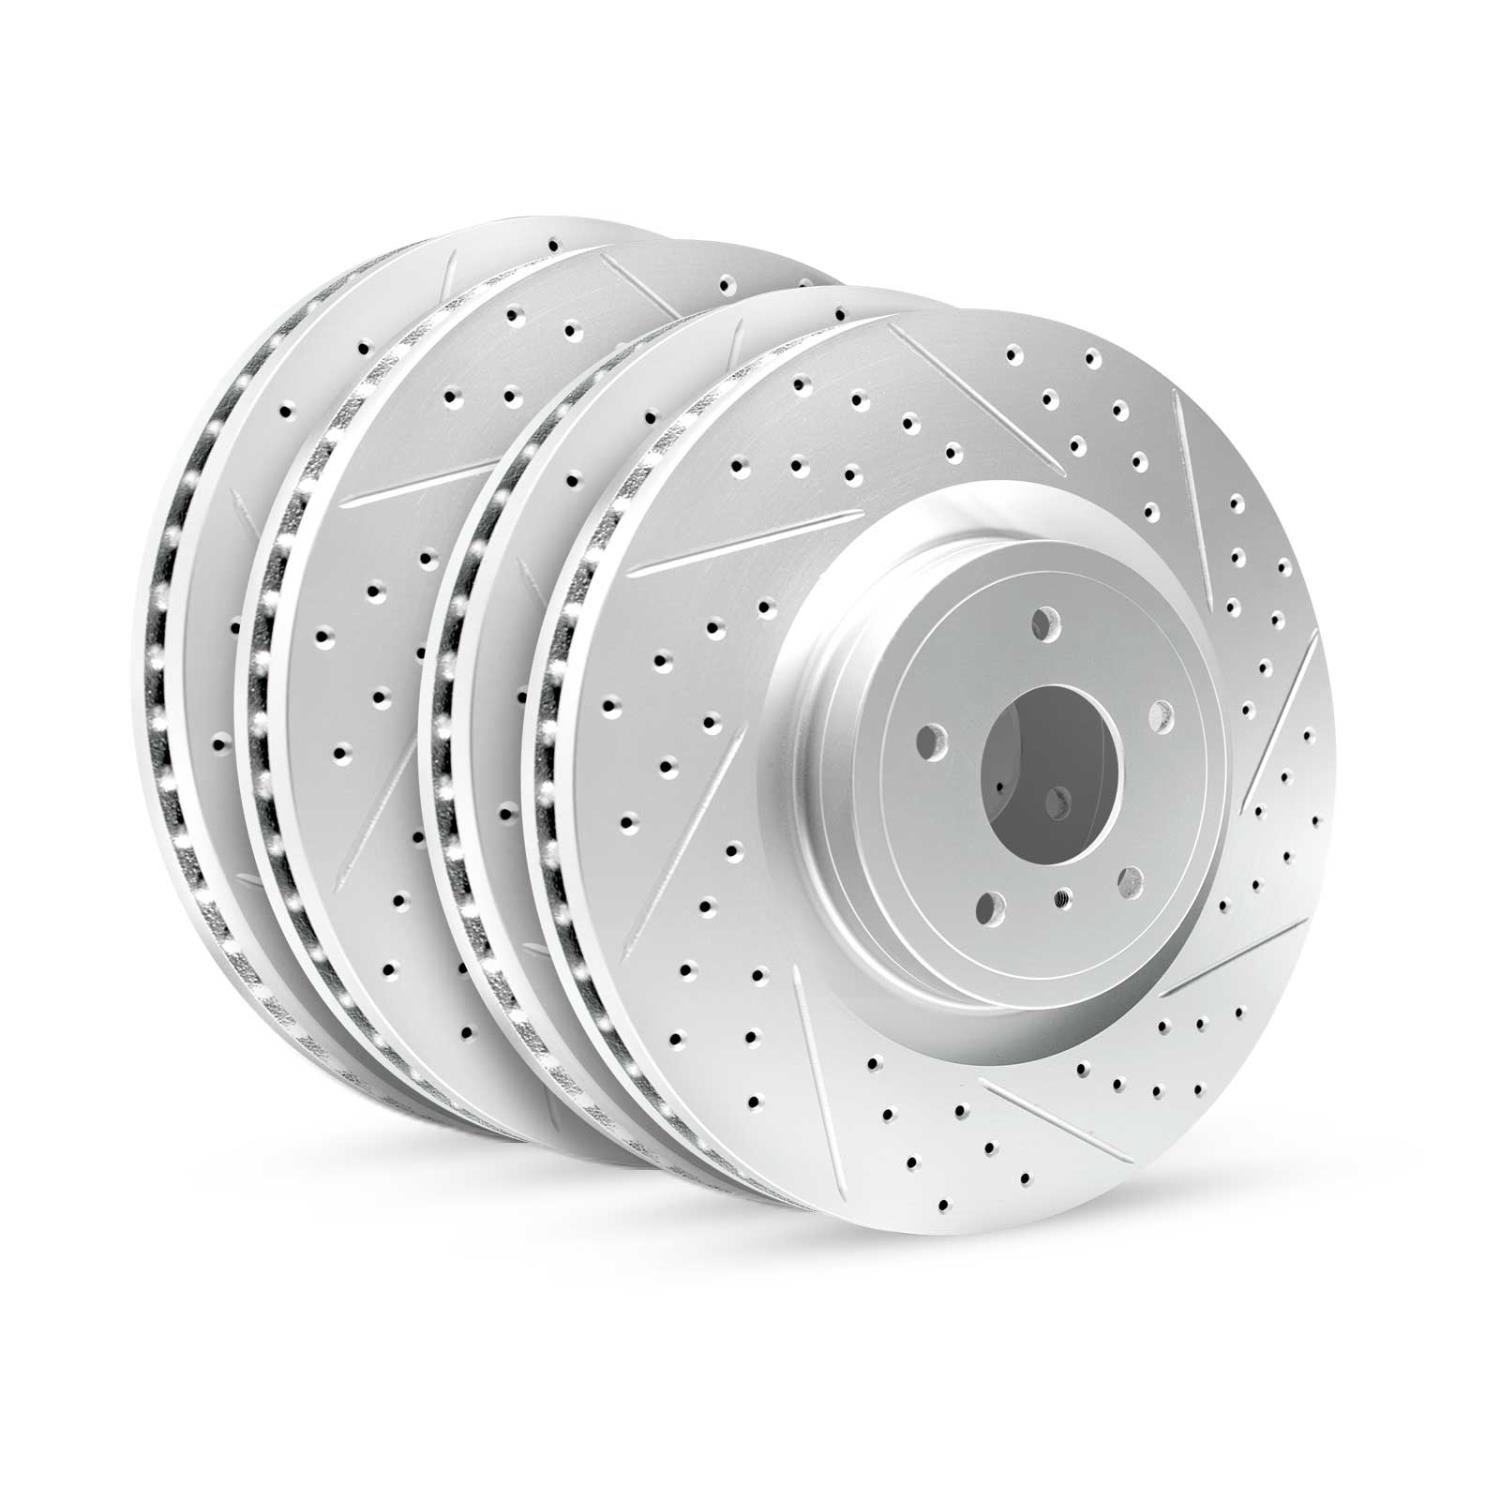 GEO-Carbon Drilled/Slotted Rotors, 2014-2019 Ford/Mazda,